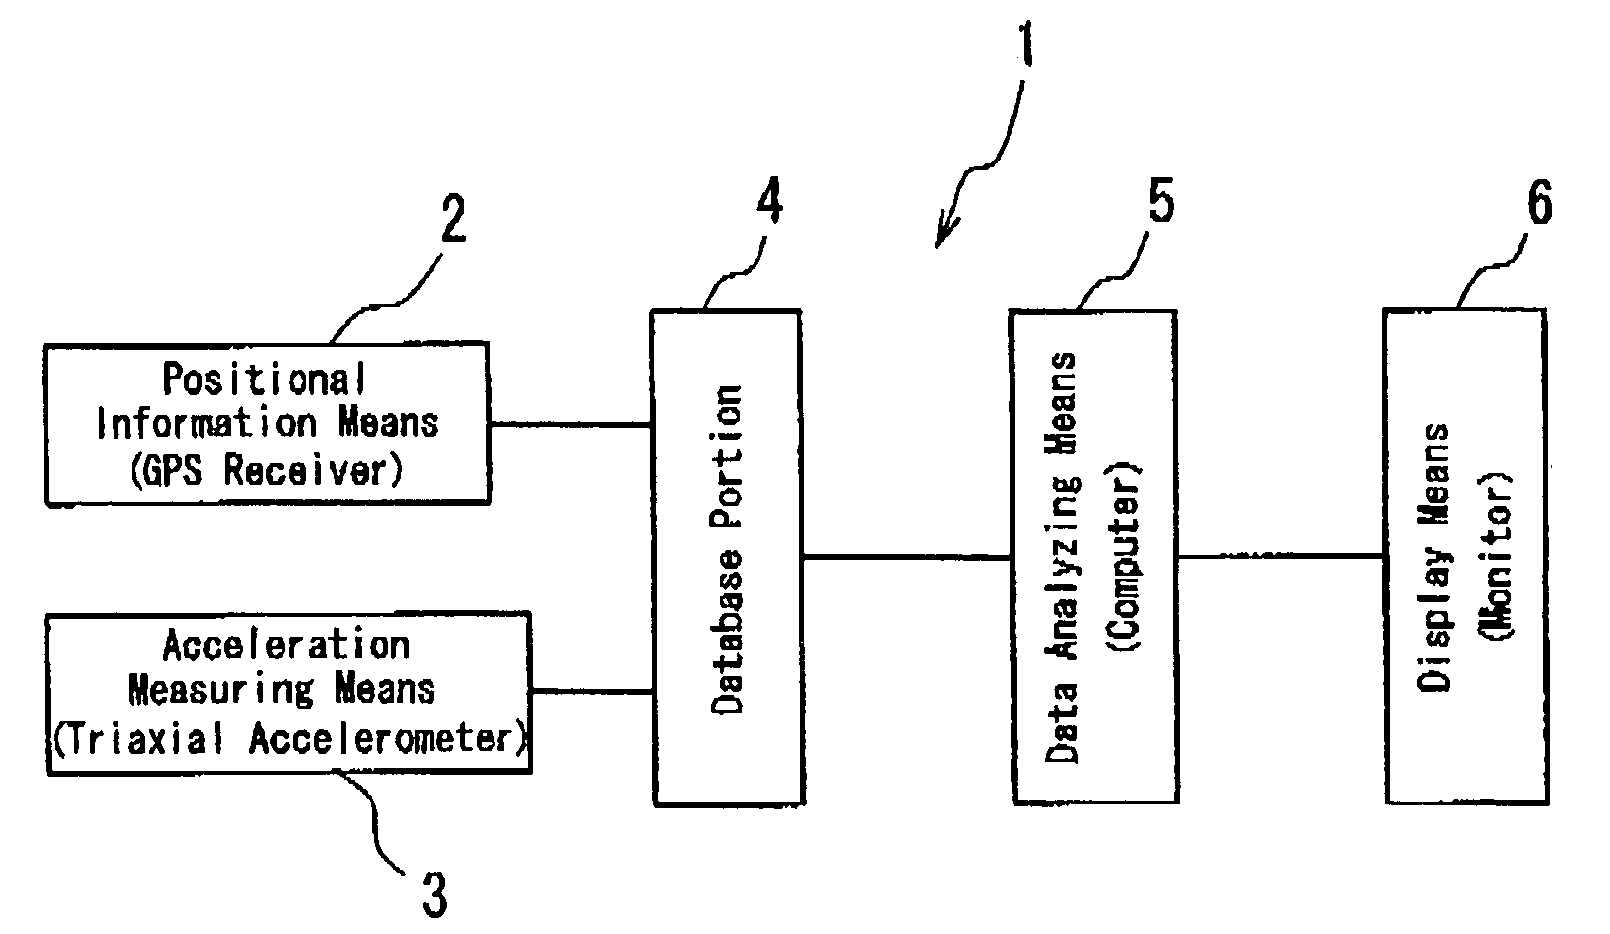 System and method for quantitative analysis of cause of tire trouble